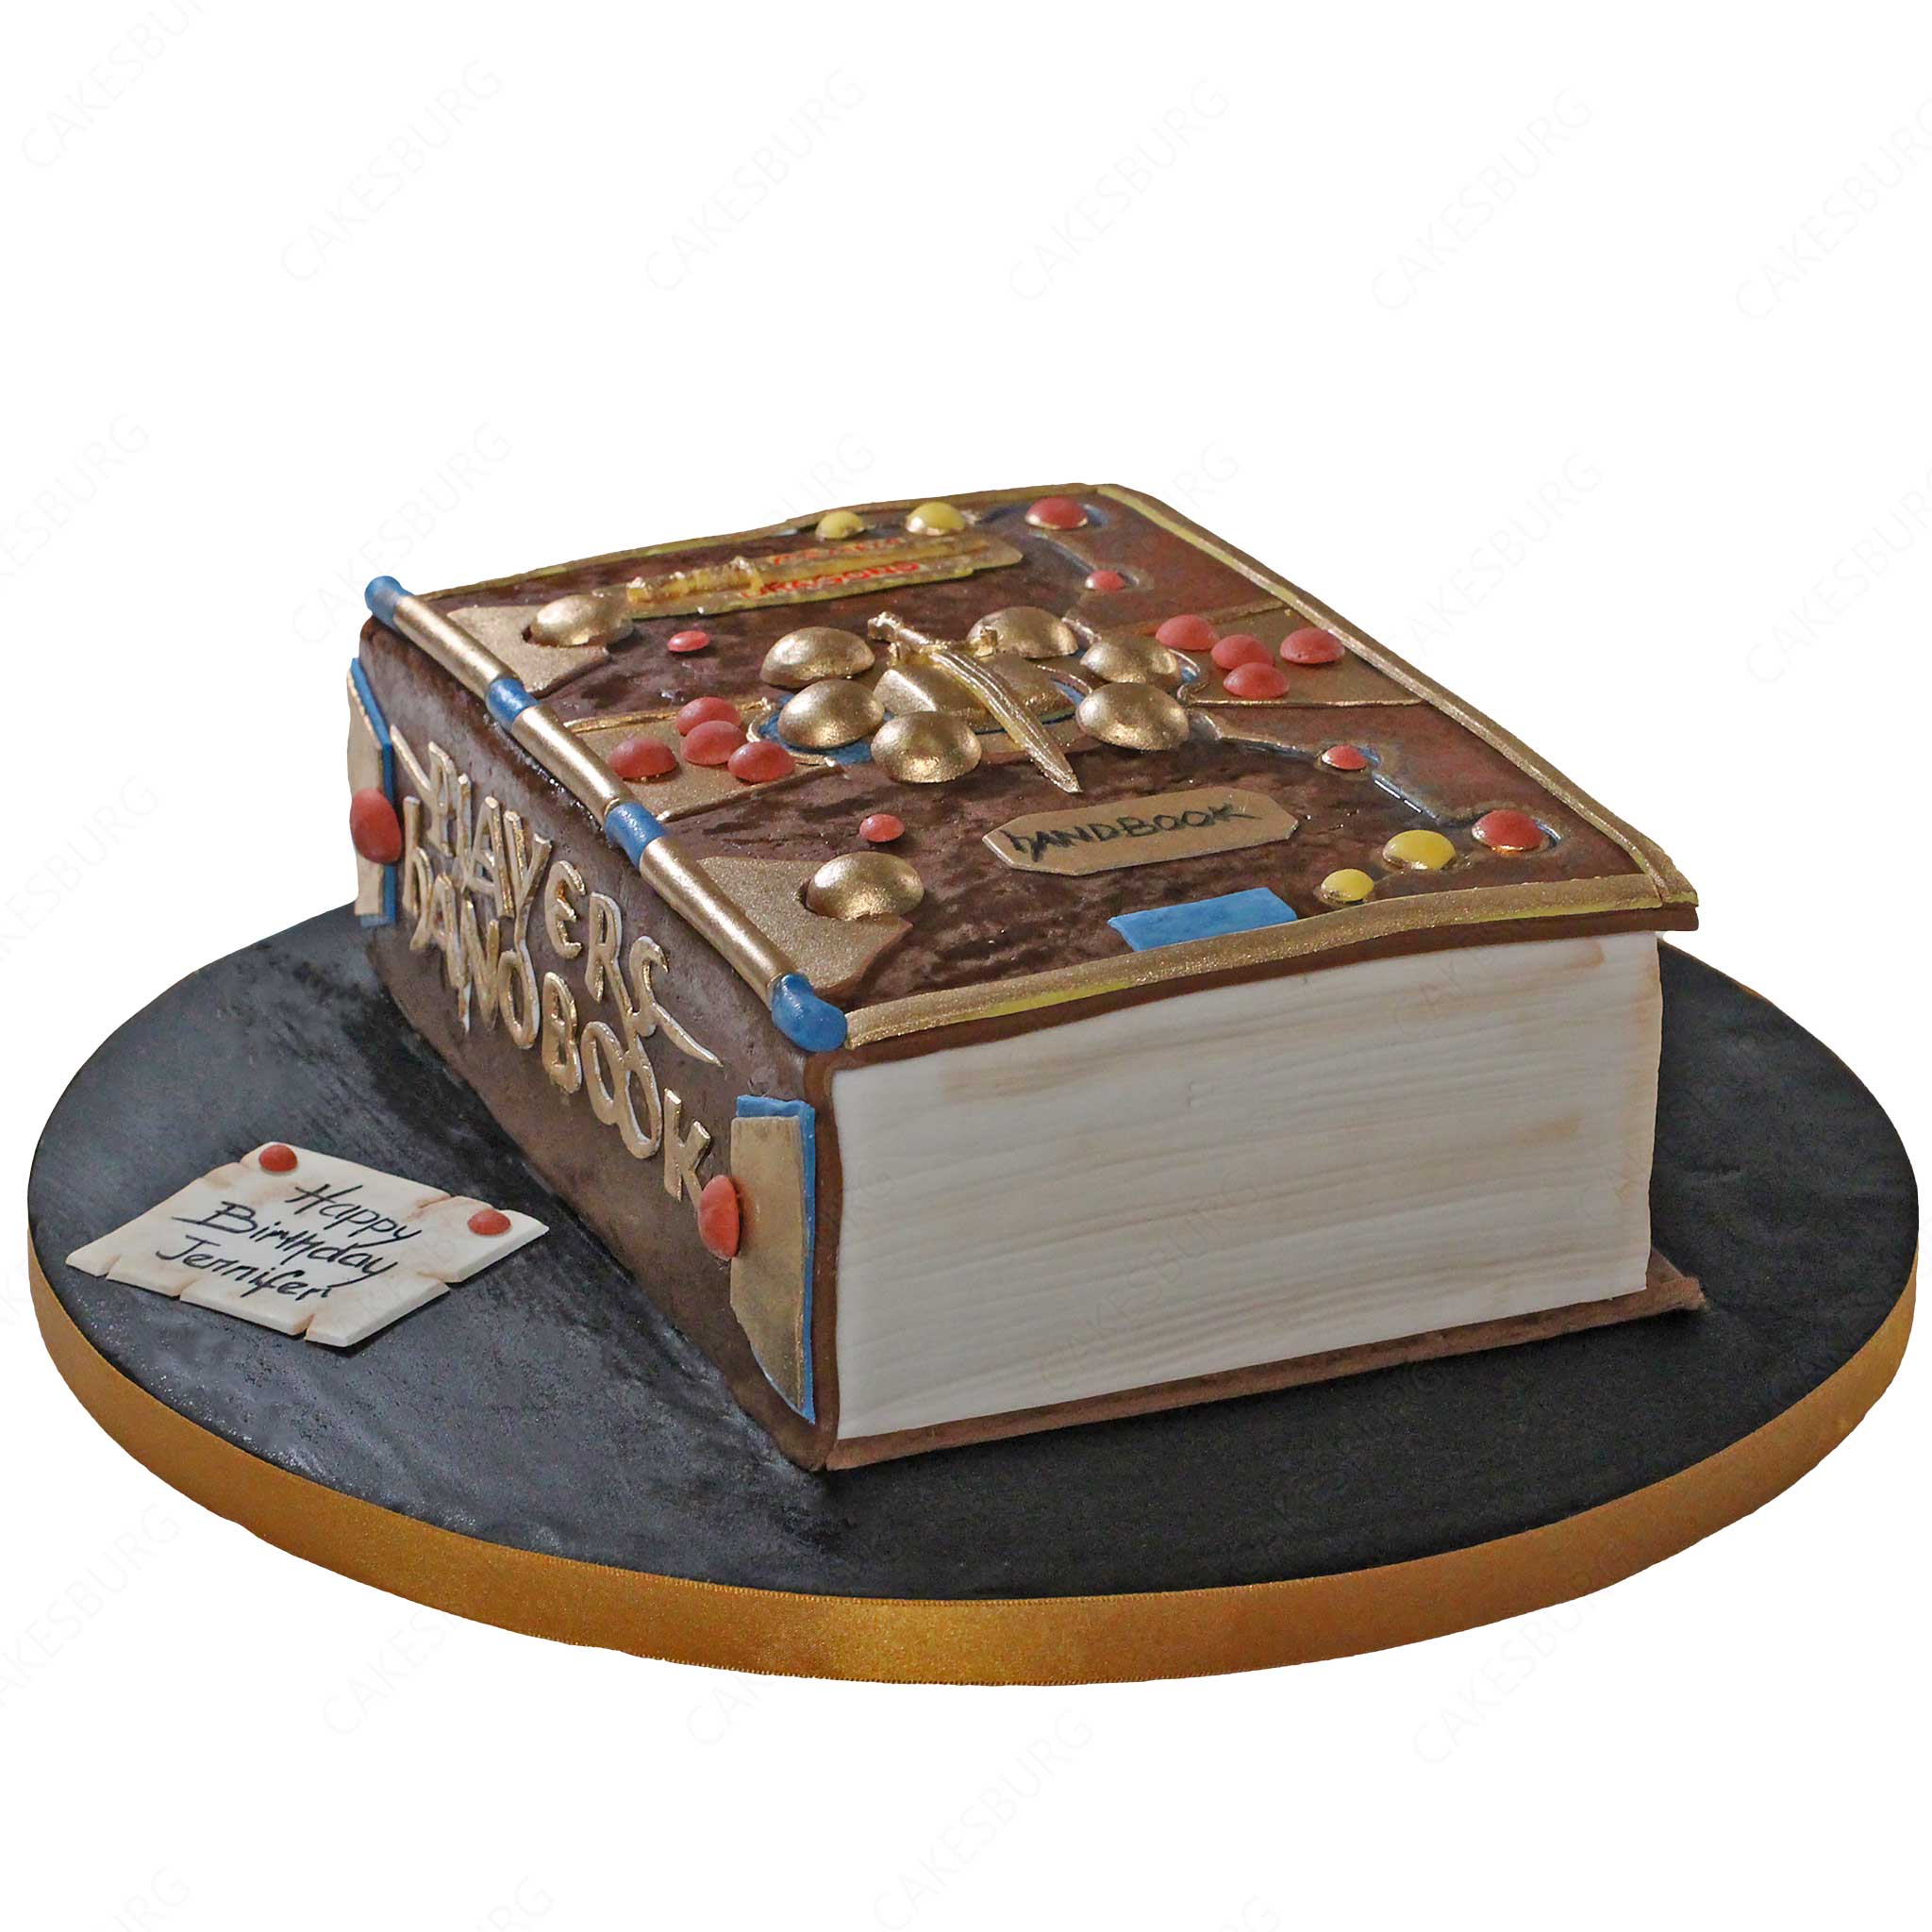 Cake decorating books by Lindy Smith best-selling sugarcraft author